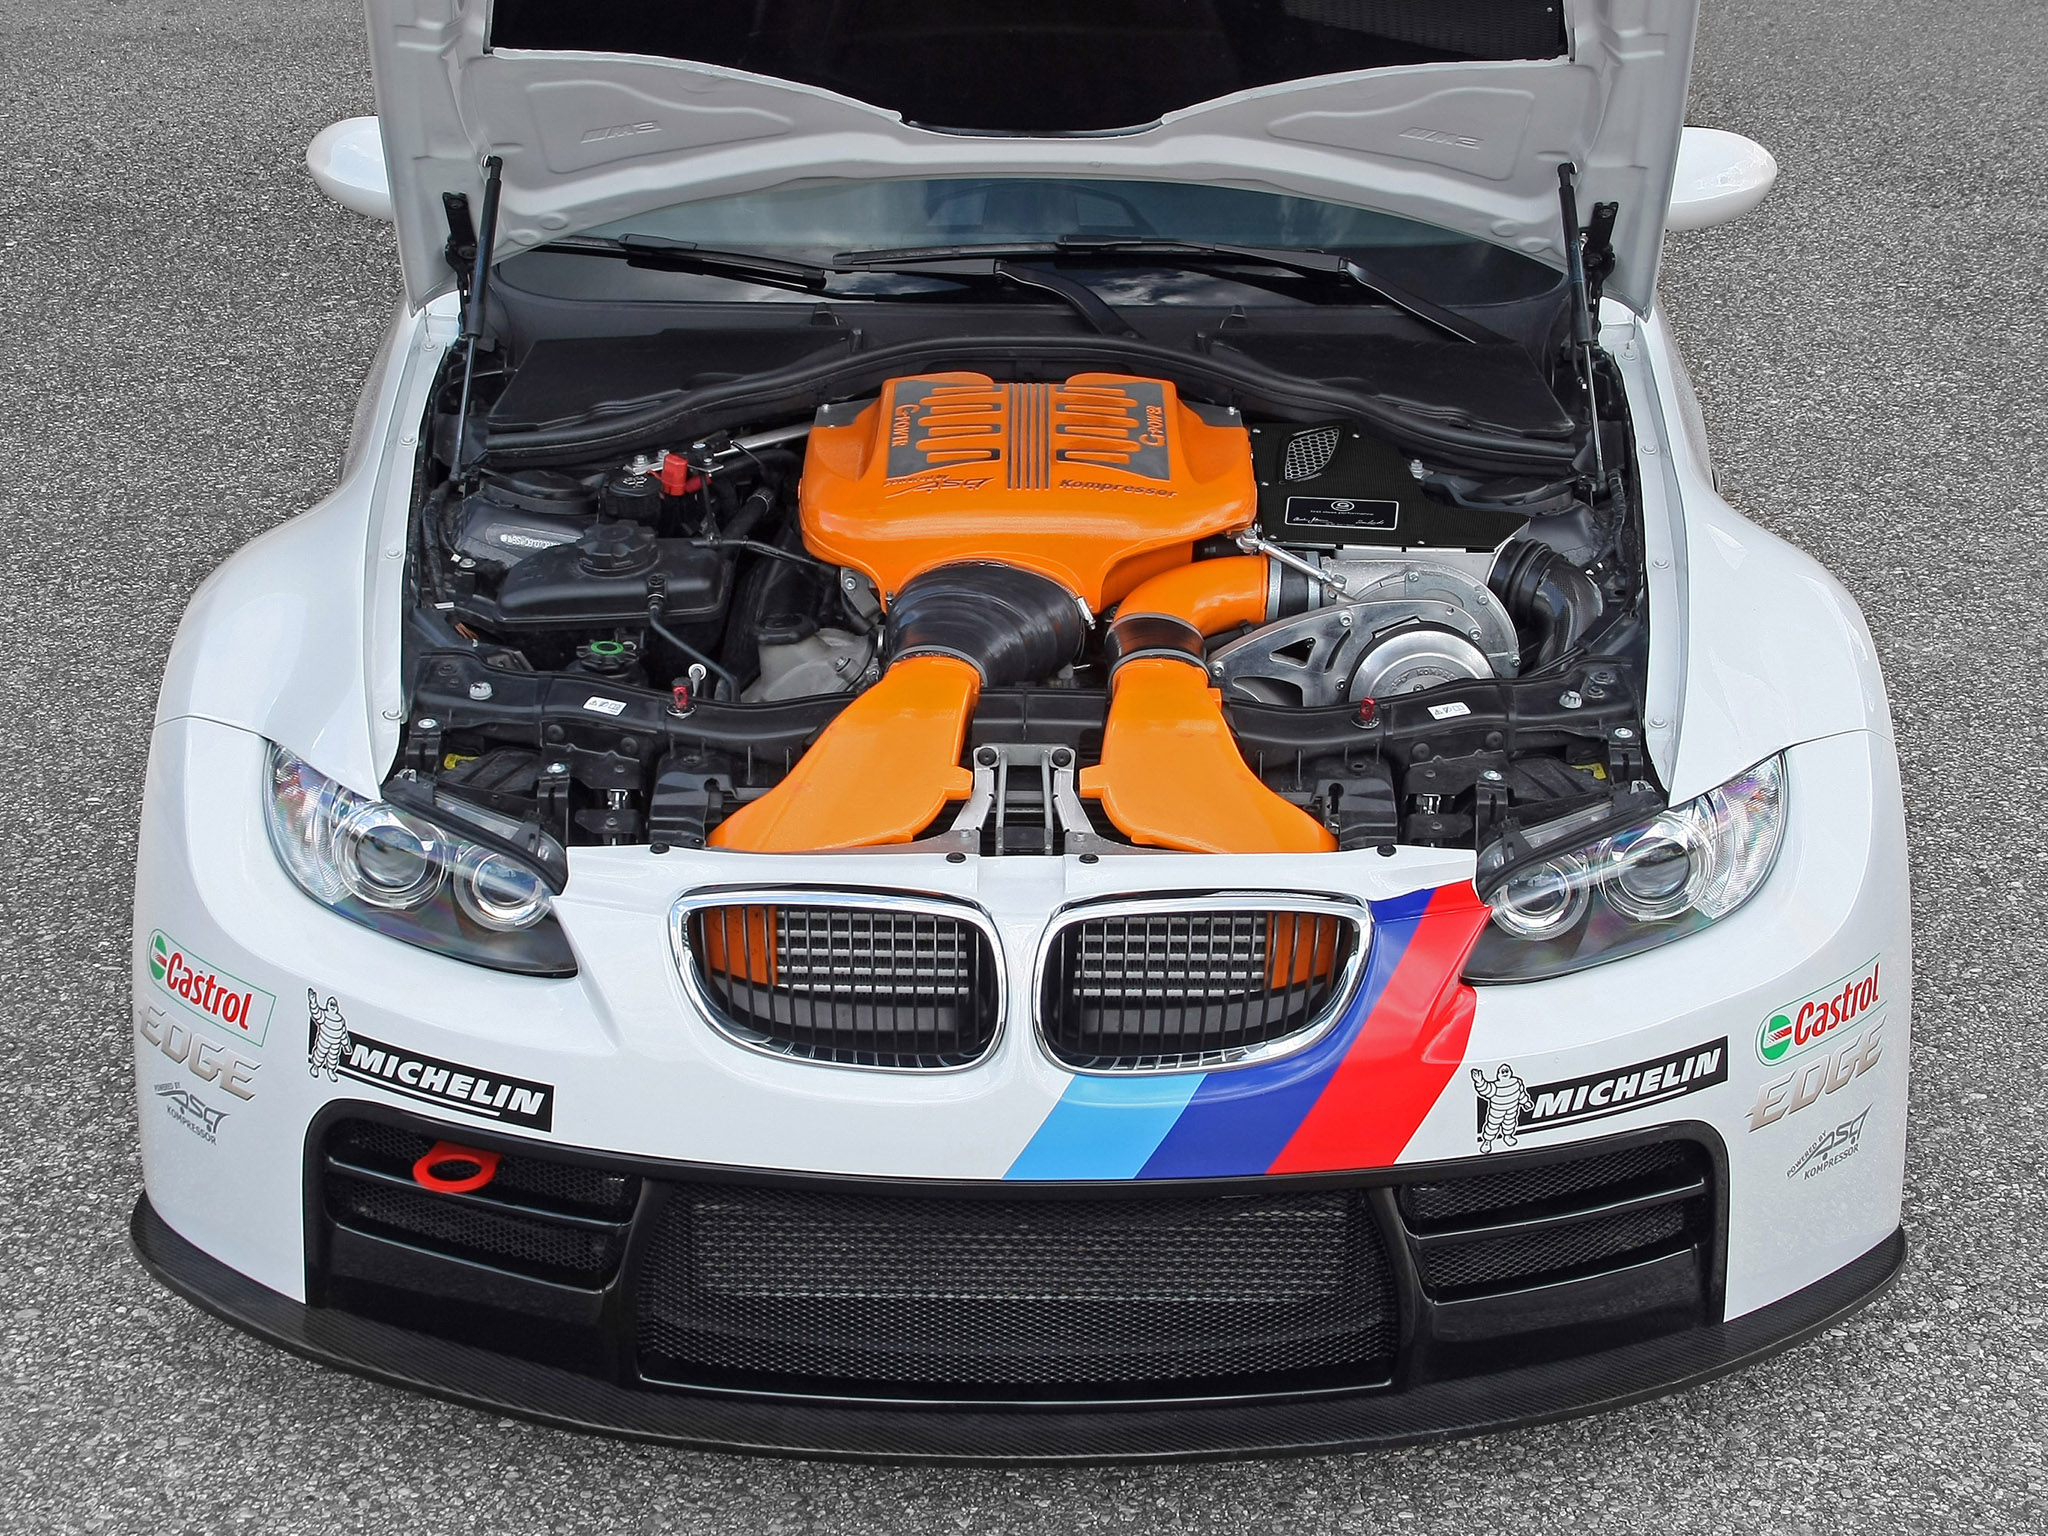 2013, G power, Bmw, M3, Gt2 r, E92, Gt2, Tuning, Race, Racing, Engine, Engines Wallpaper